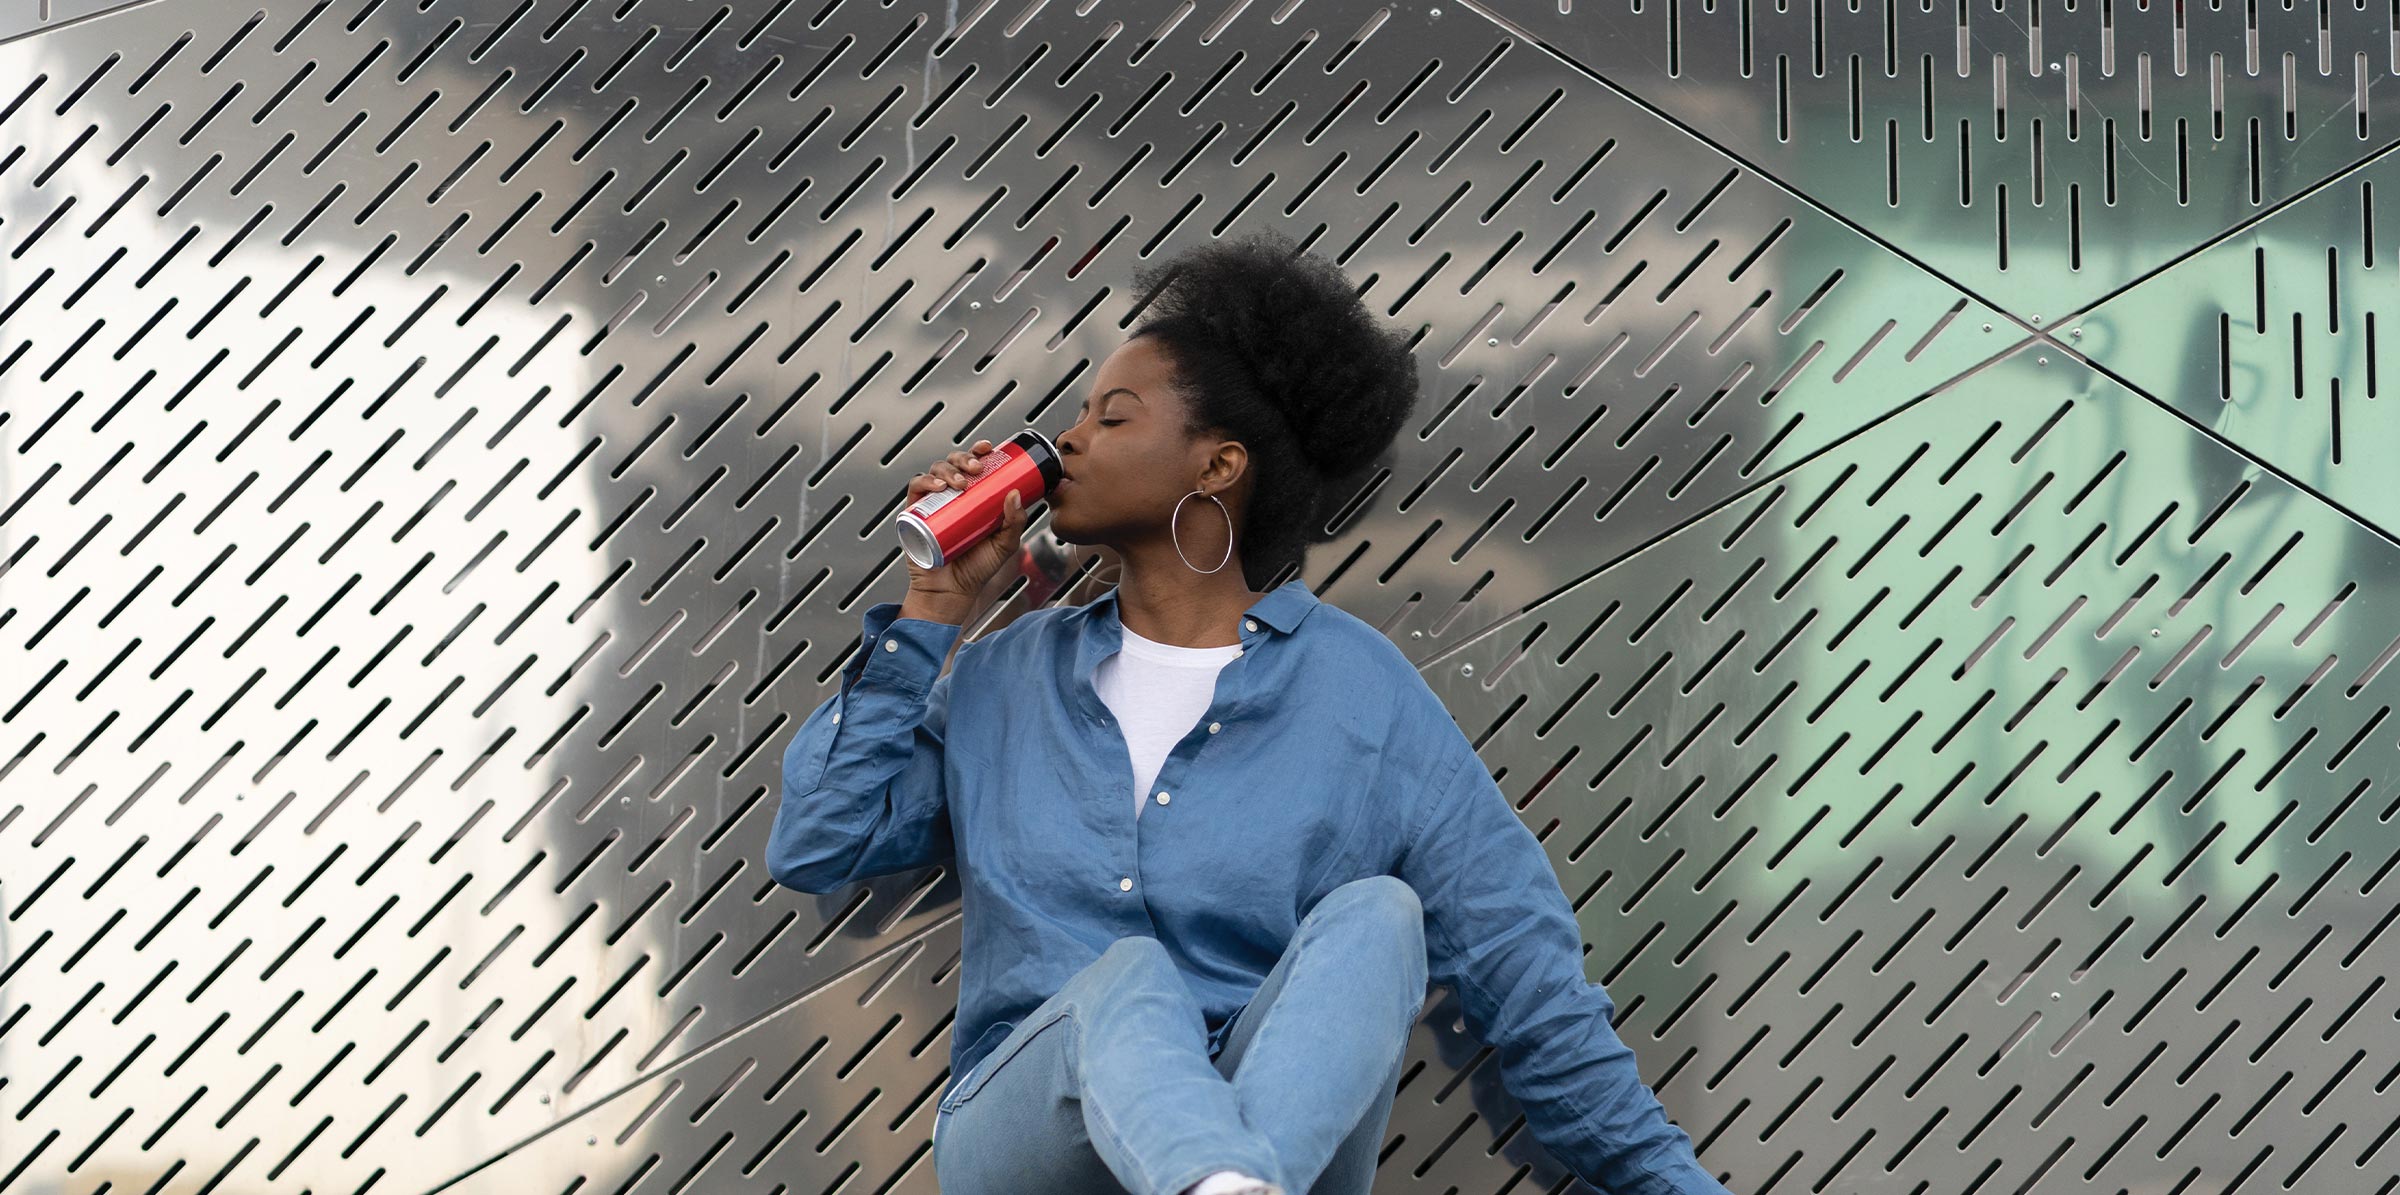 African skateboarder girl refreshing after longboarding sit on skate drinking soda beverage from metal can. Trendy urban young female relaxing after active training on longboard in urban space